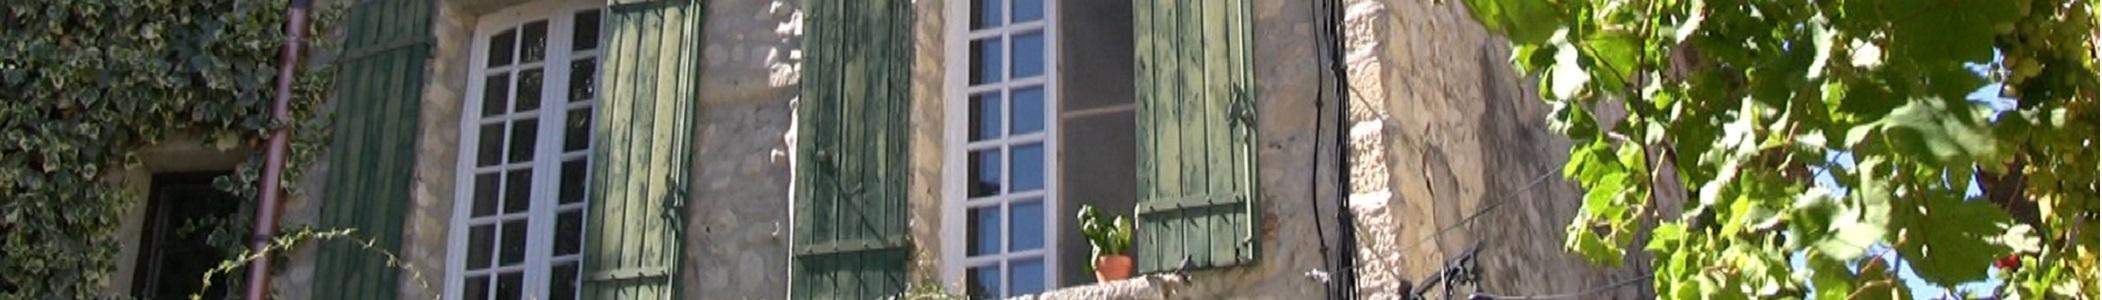 Banner image for Vaison-la-Romaine on GigsGuide